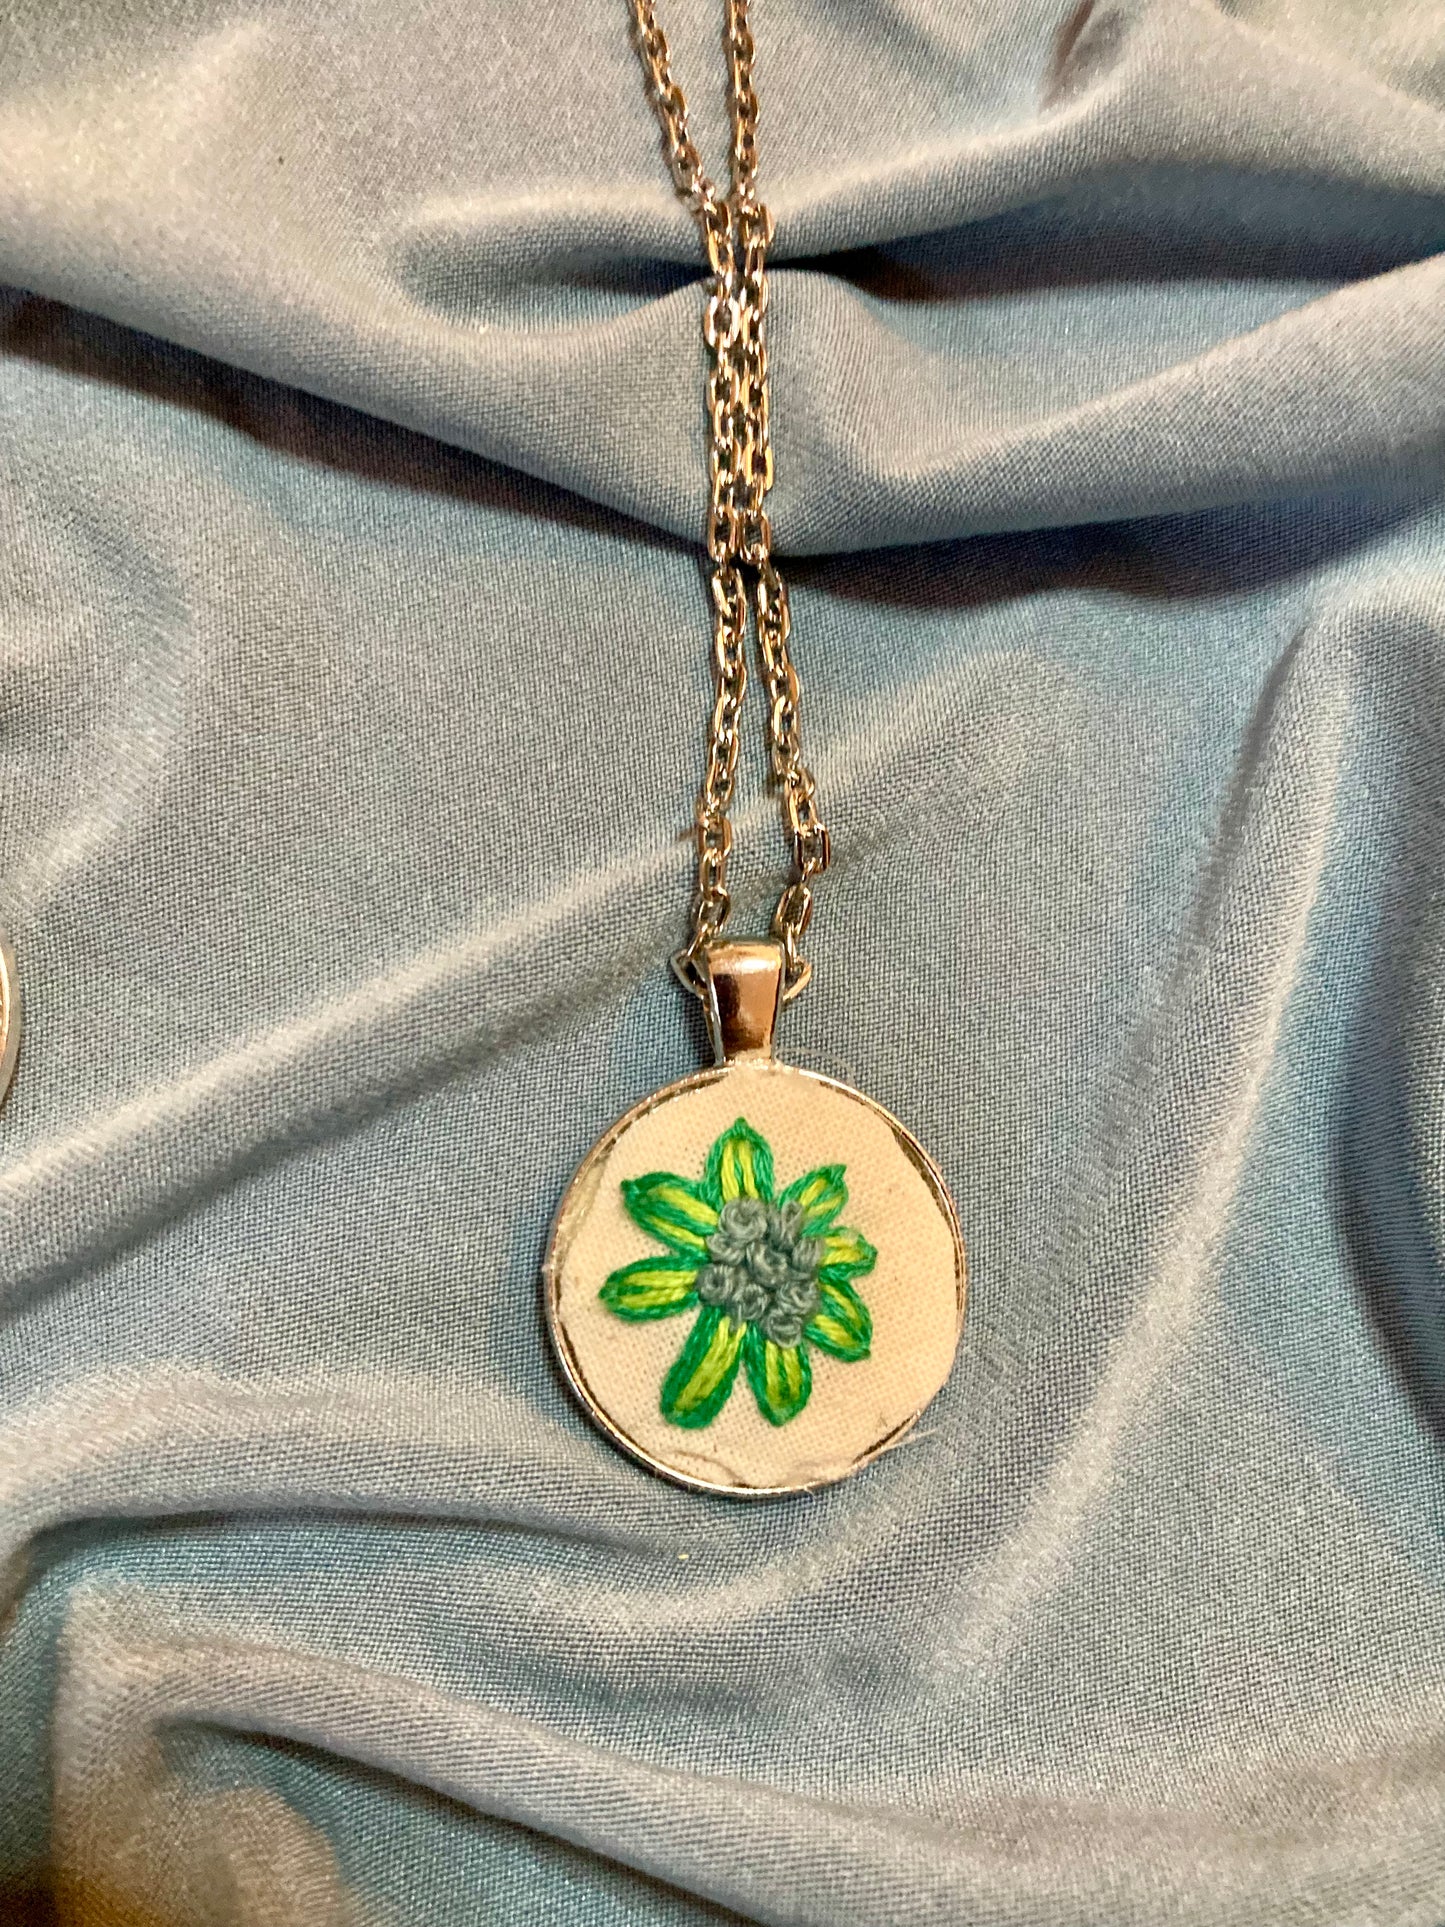 The flower bud necklace